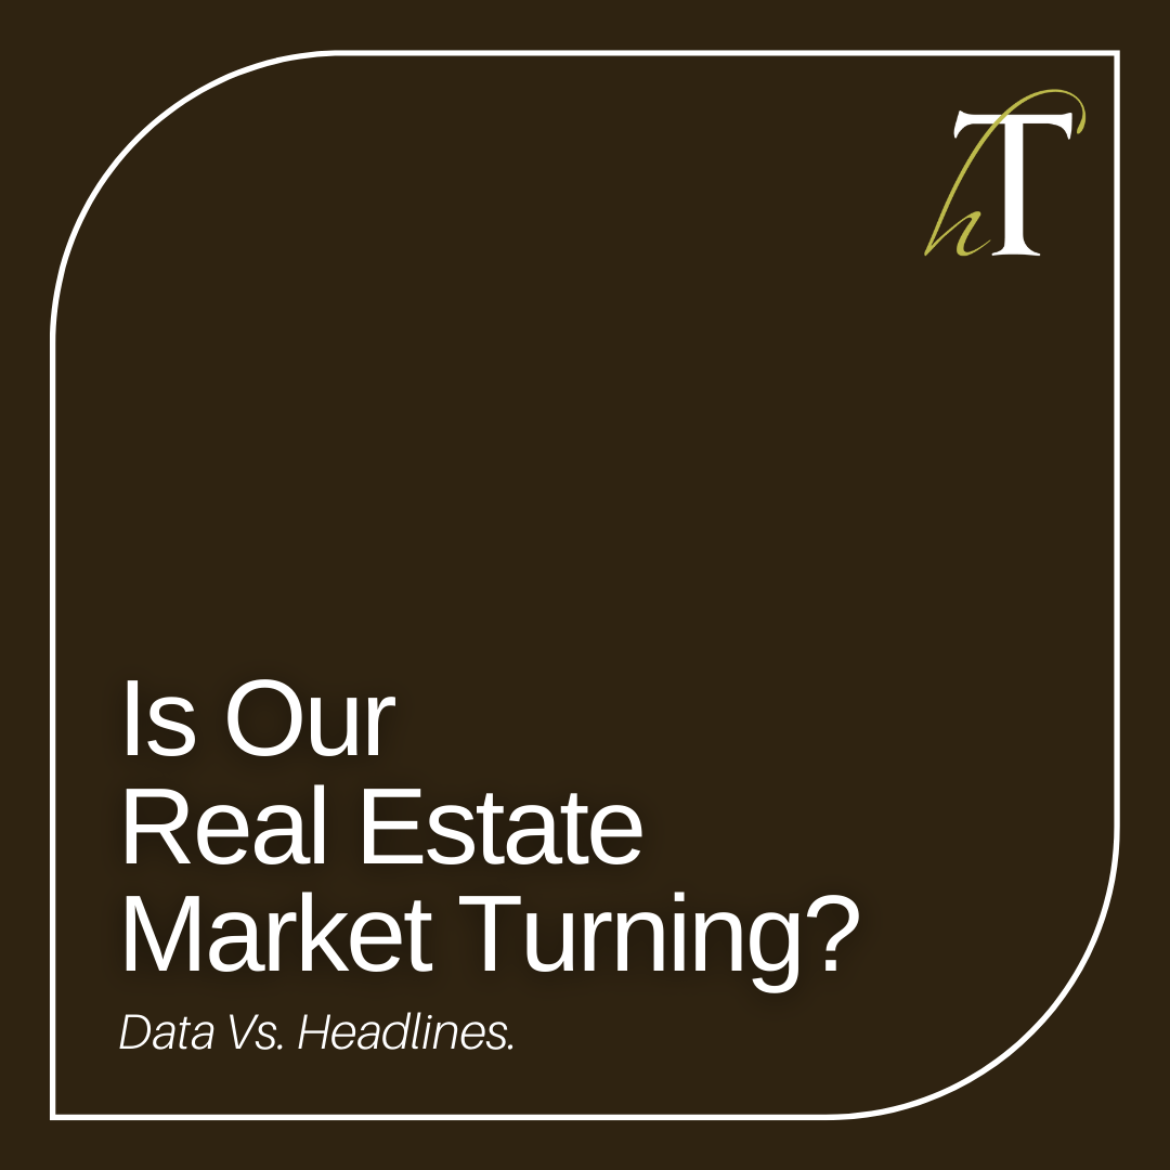 Is our real estate market turning?